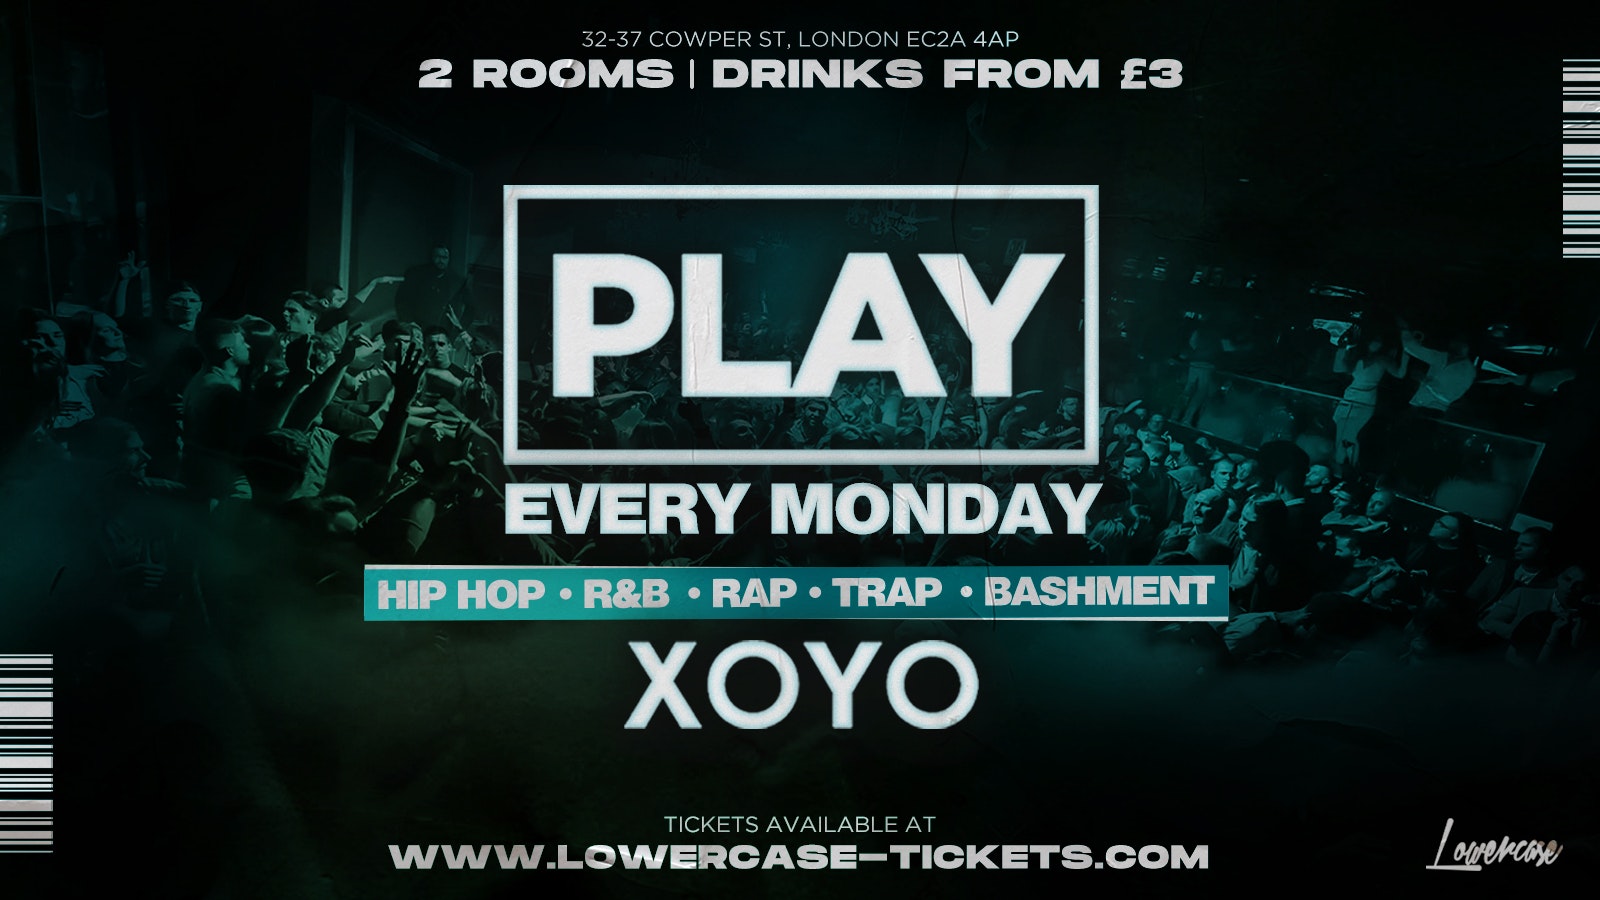 Play London – The Biggest Weekly Monday Student Night